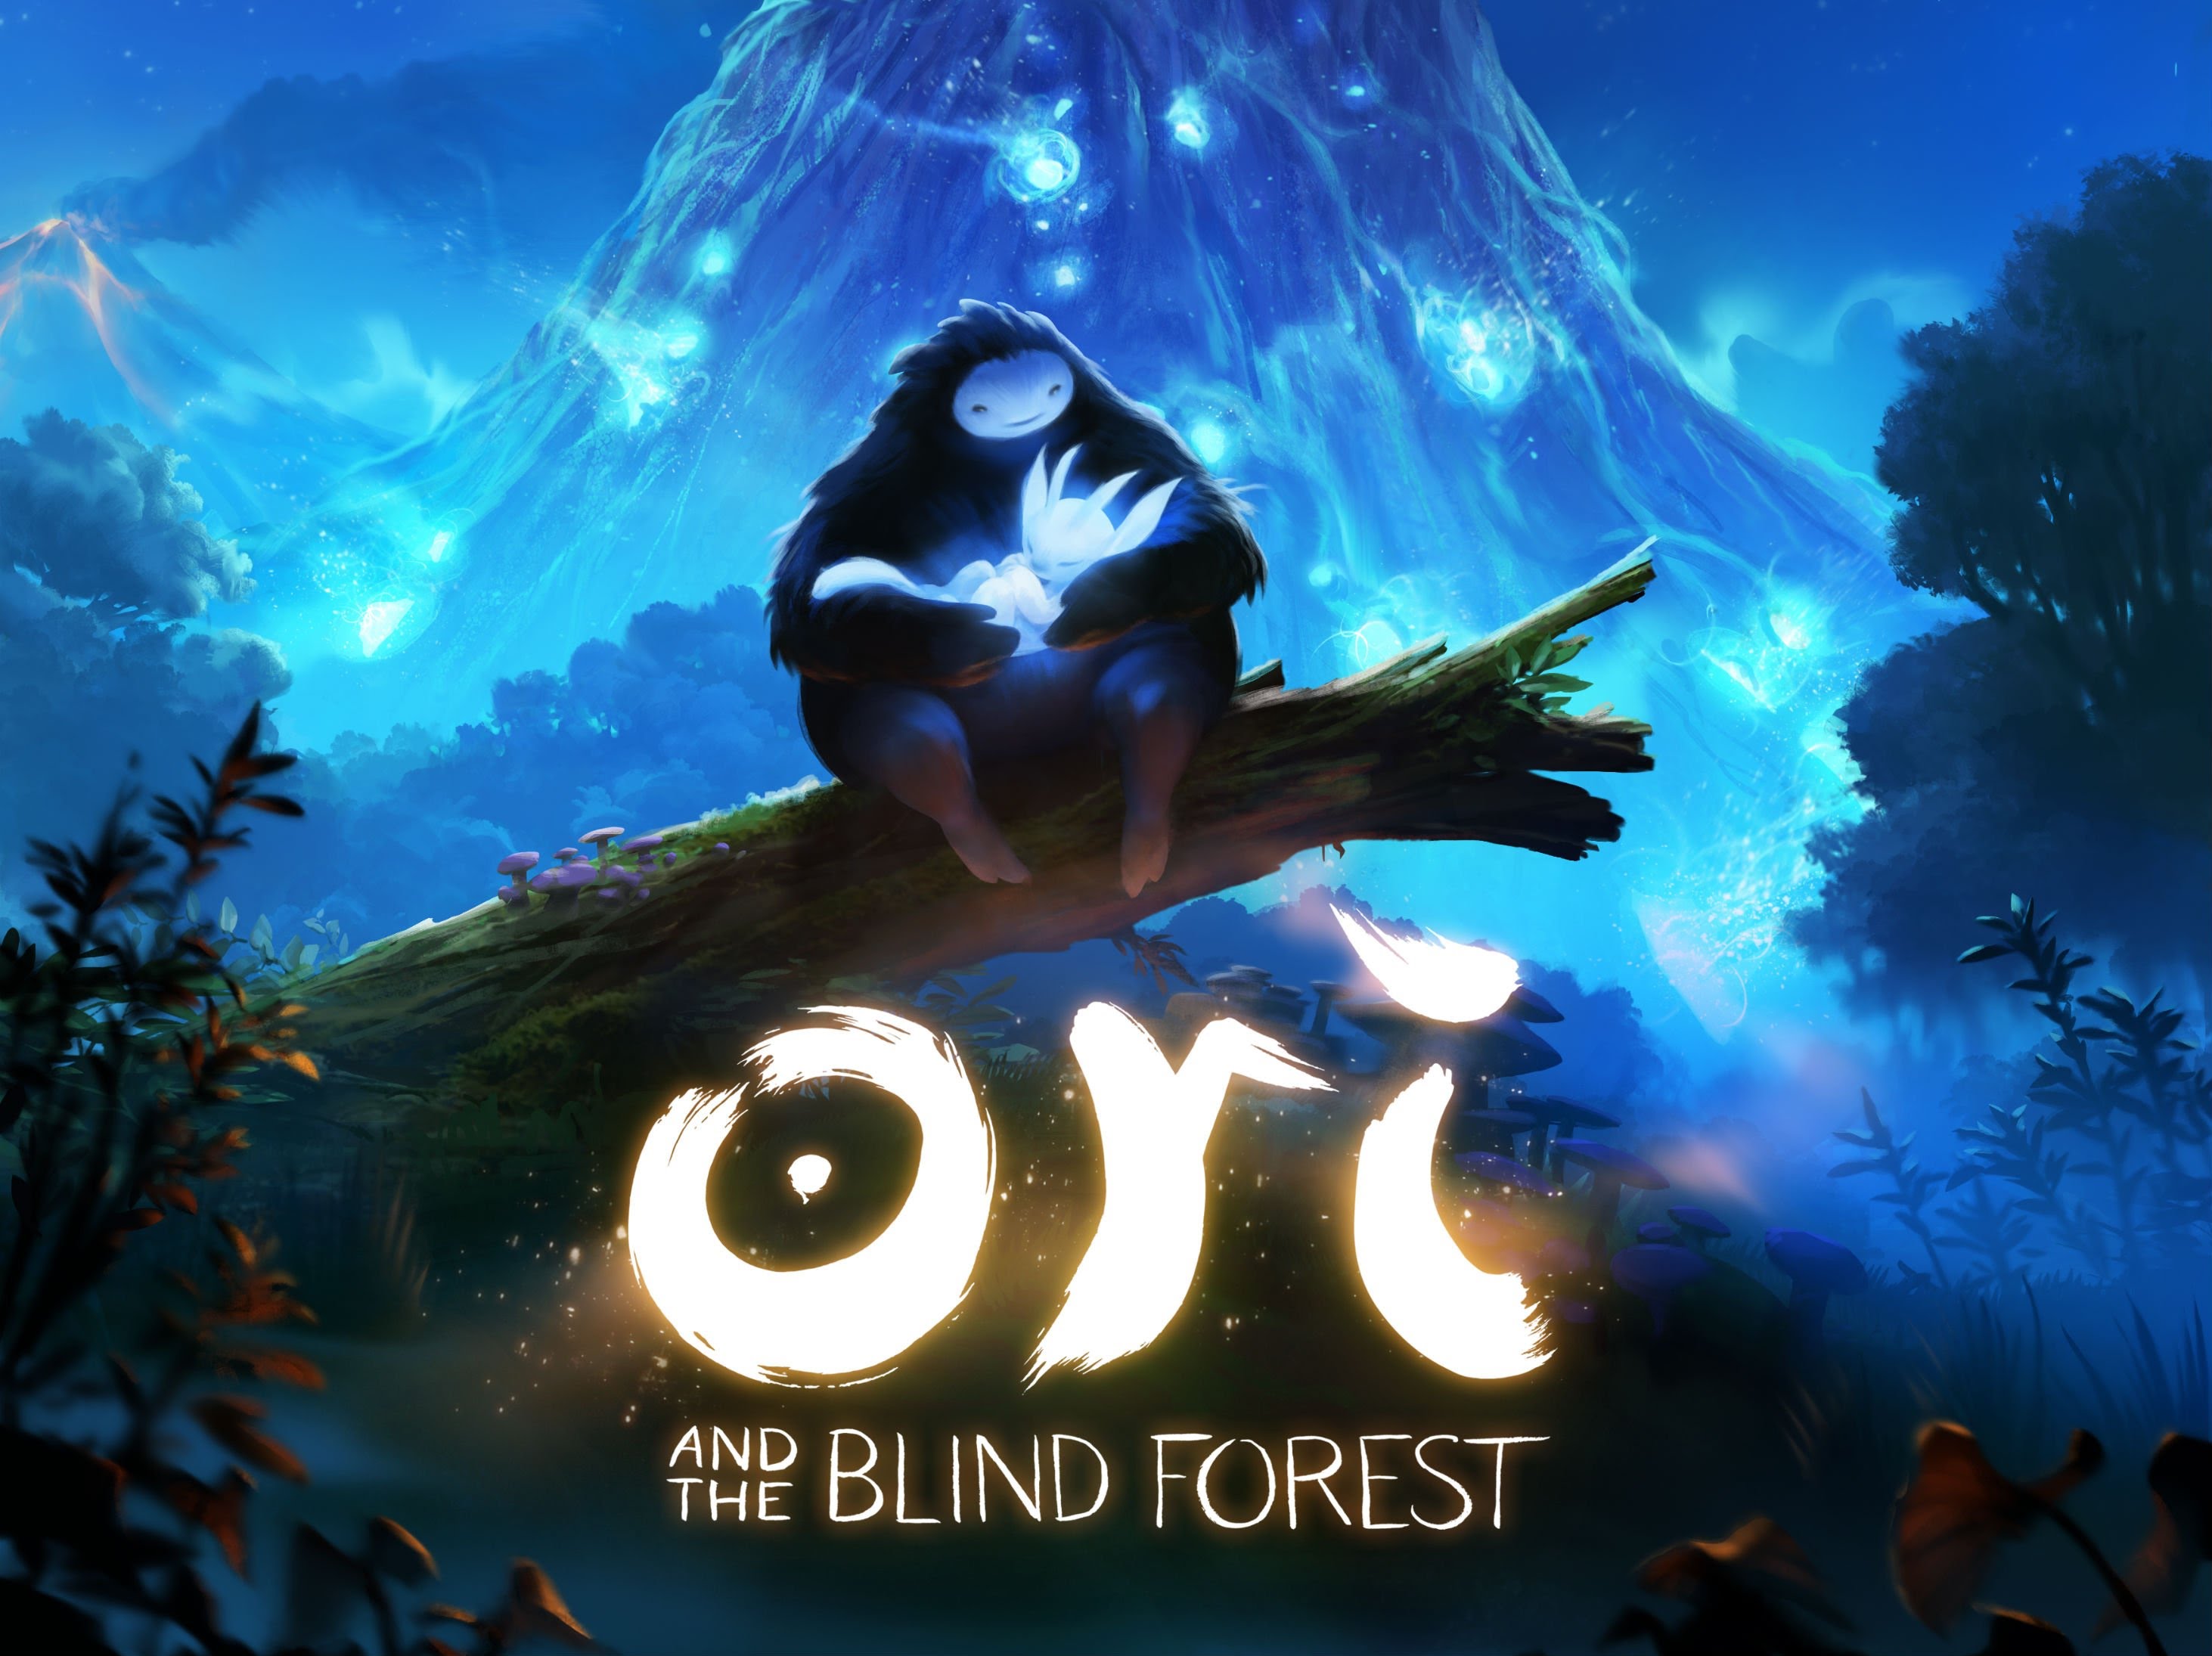 Ori and the Blind Forest 1